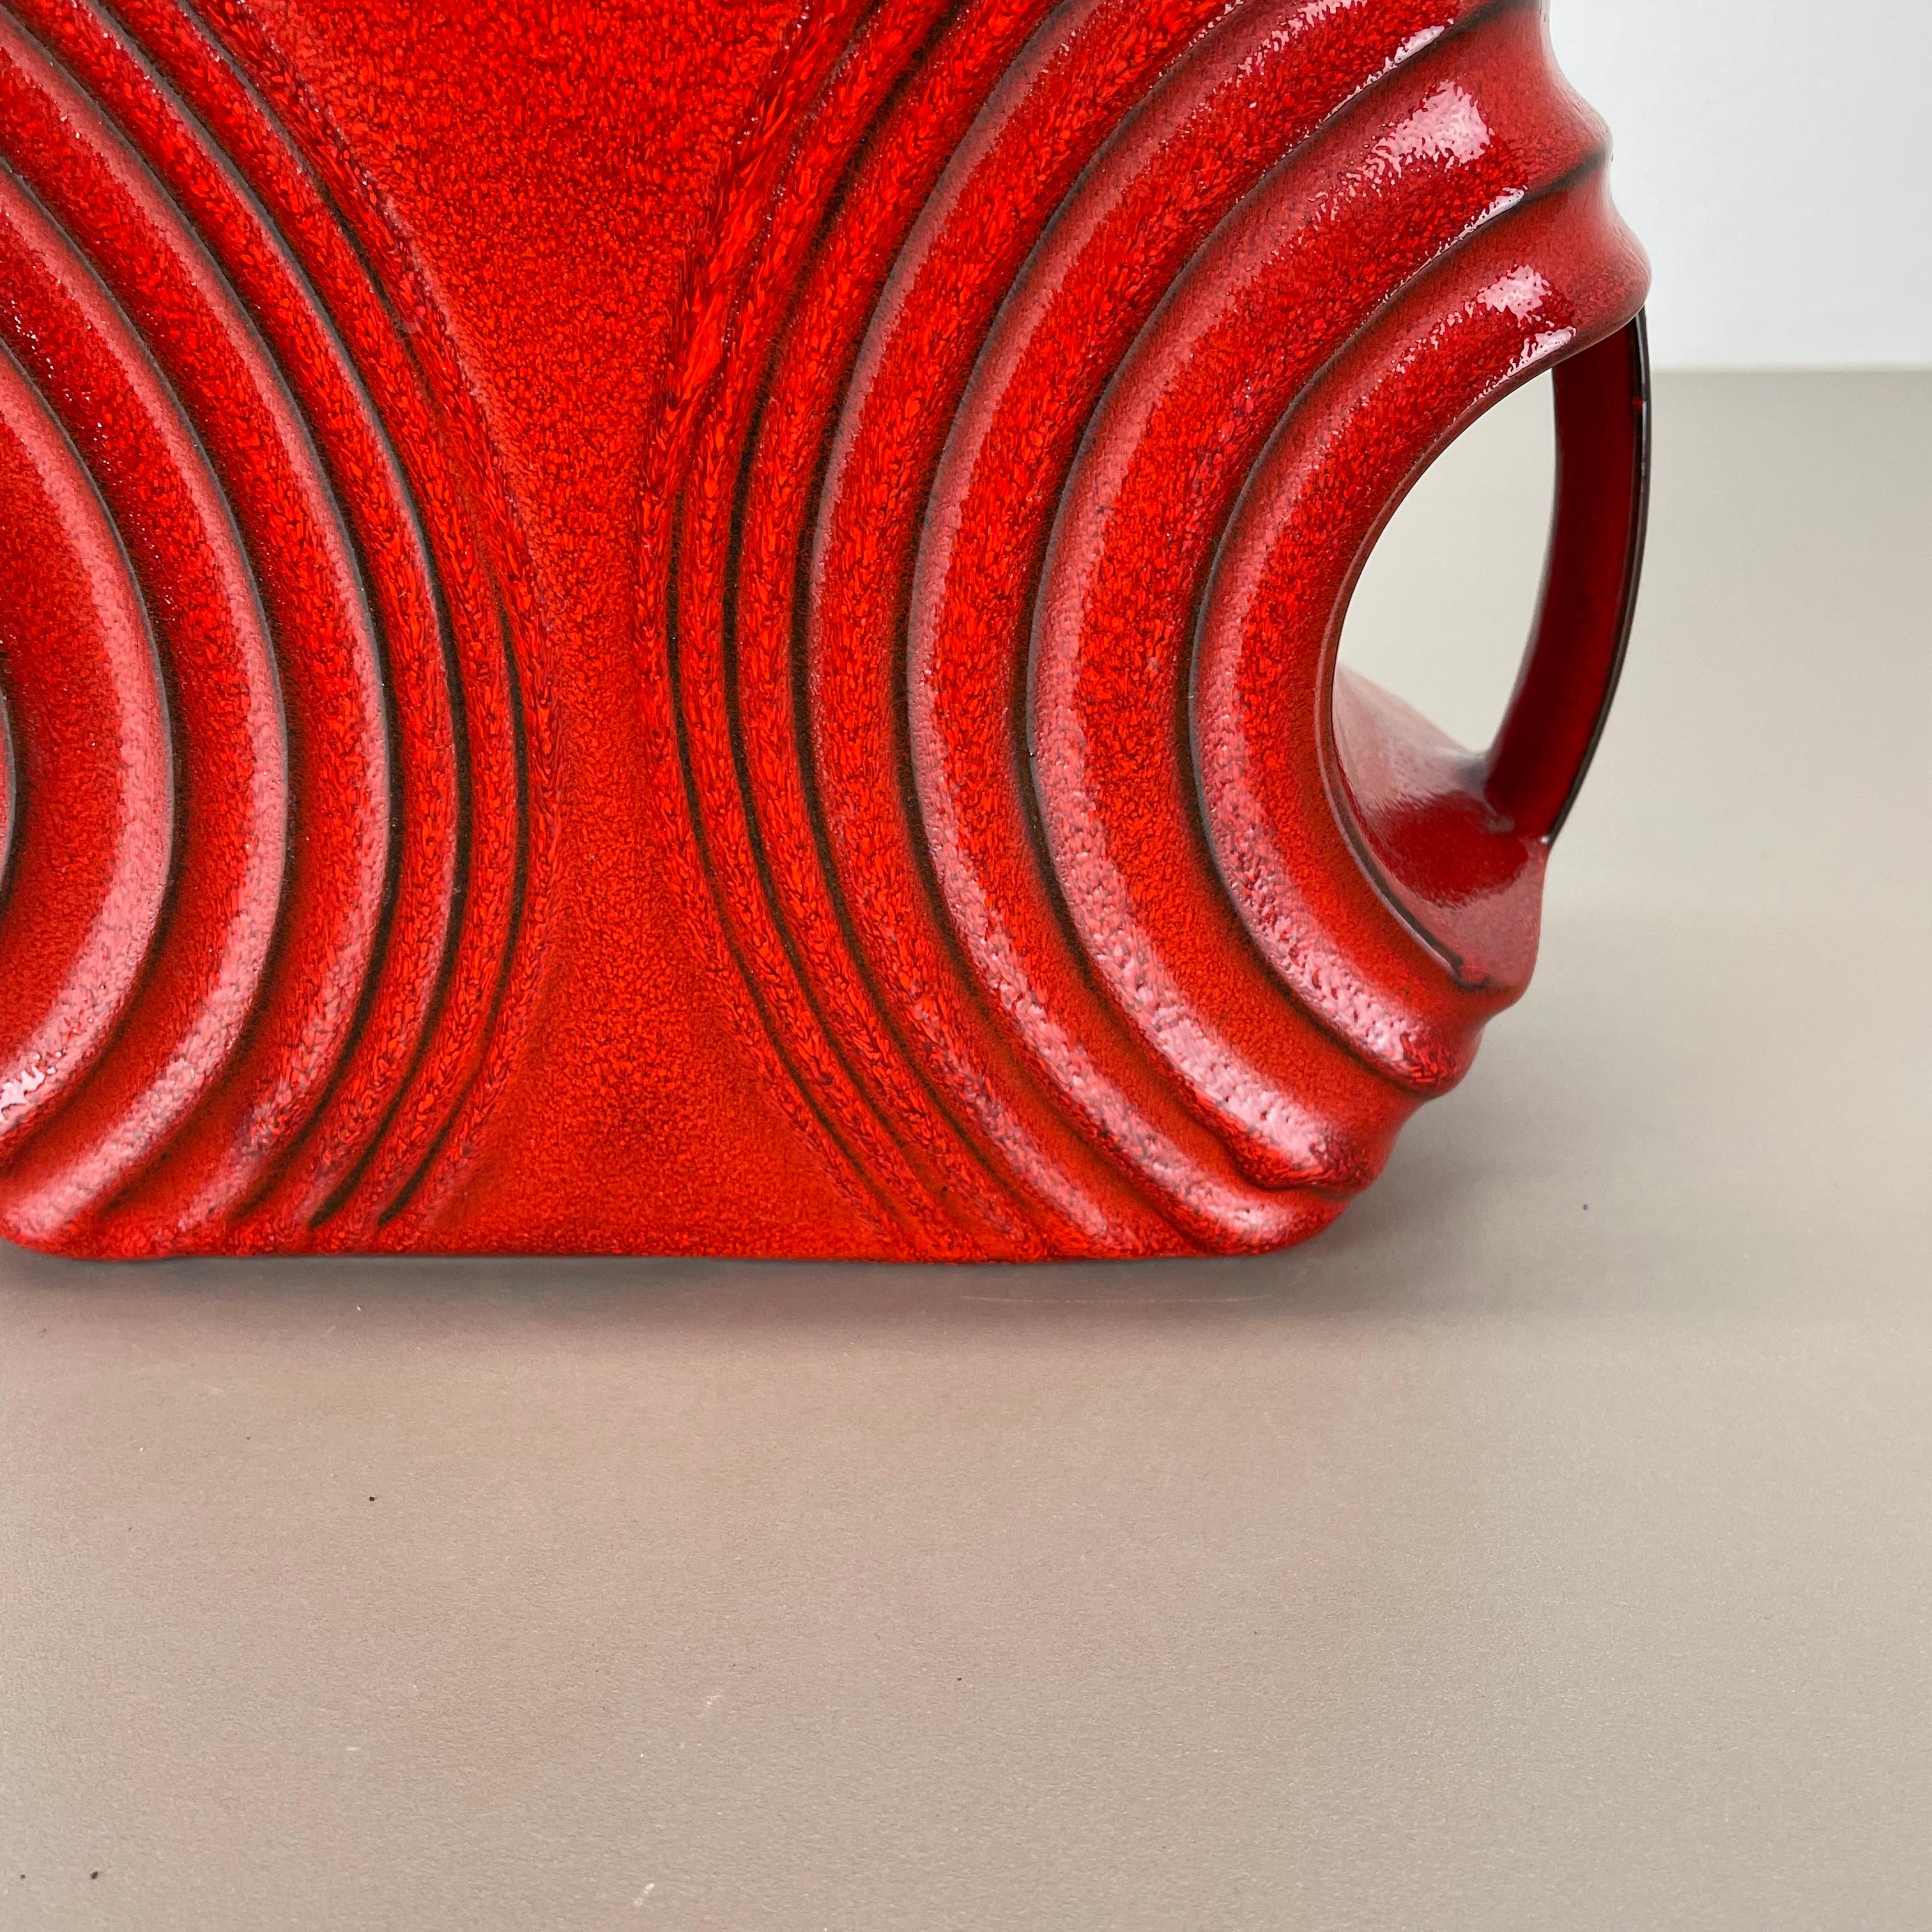 Mid-Century Modern Large red abstract vase object by Cari Zalloni for Steuler, Germany, 1970s For Sale